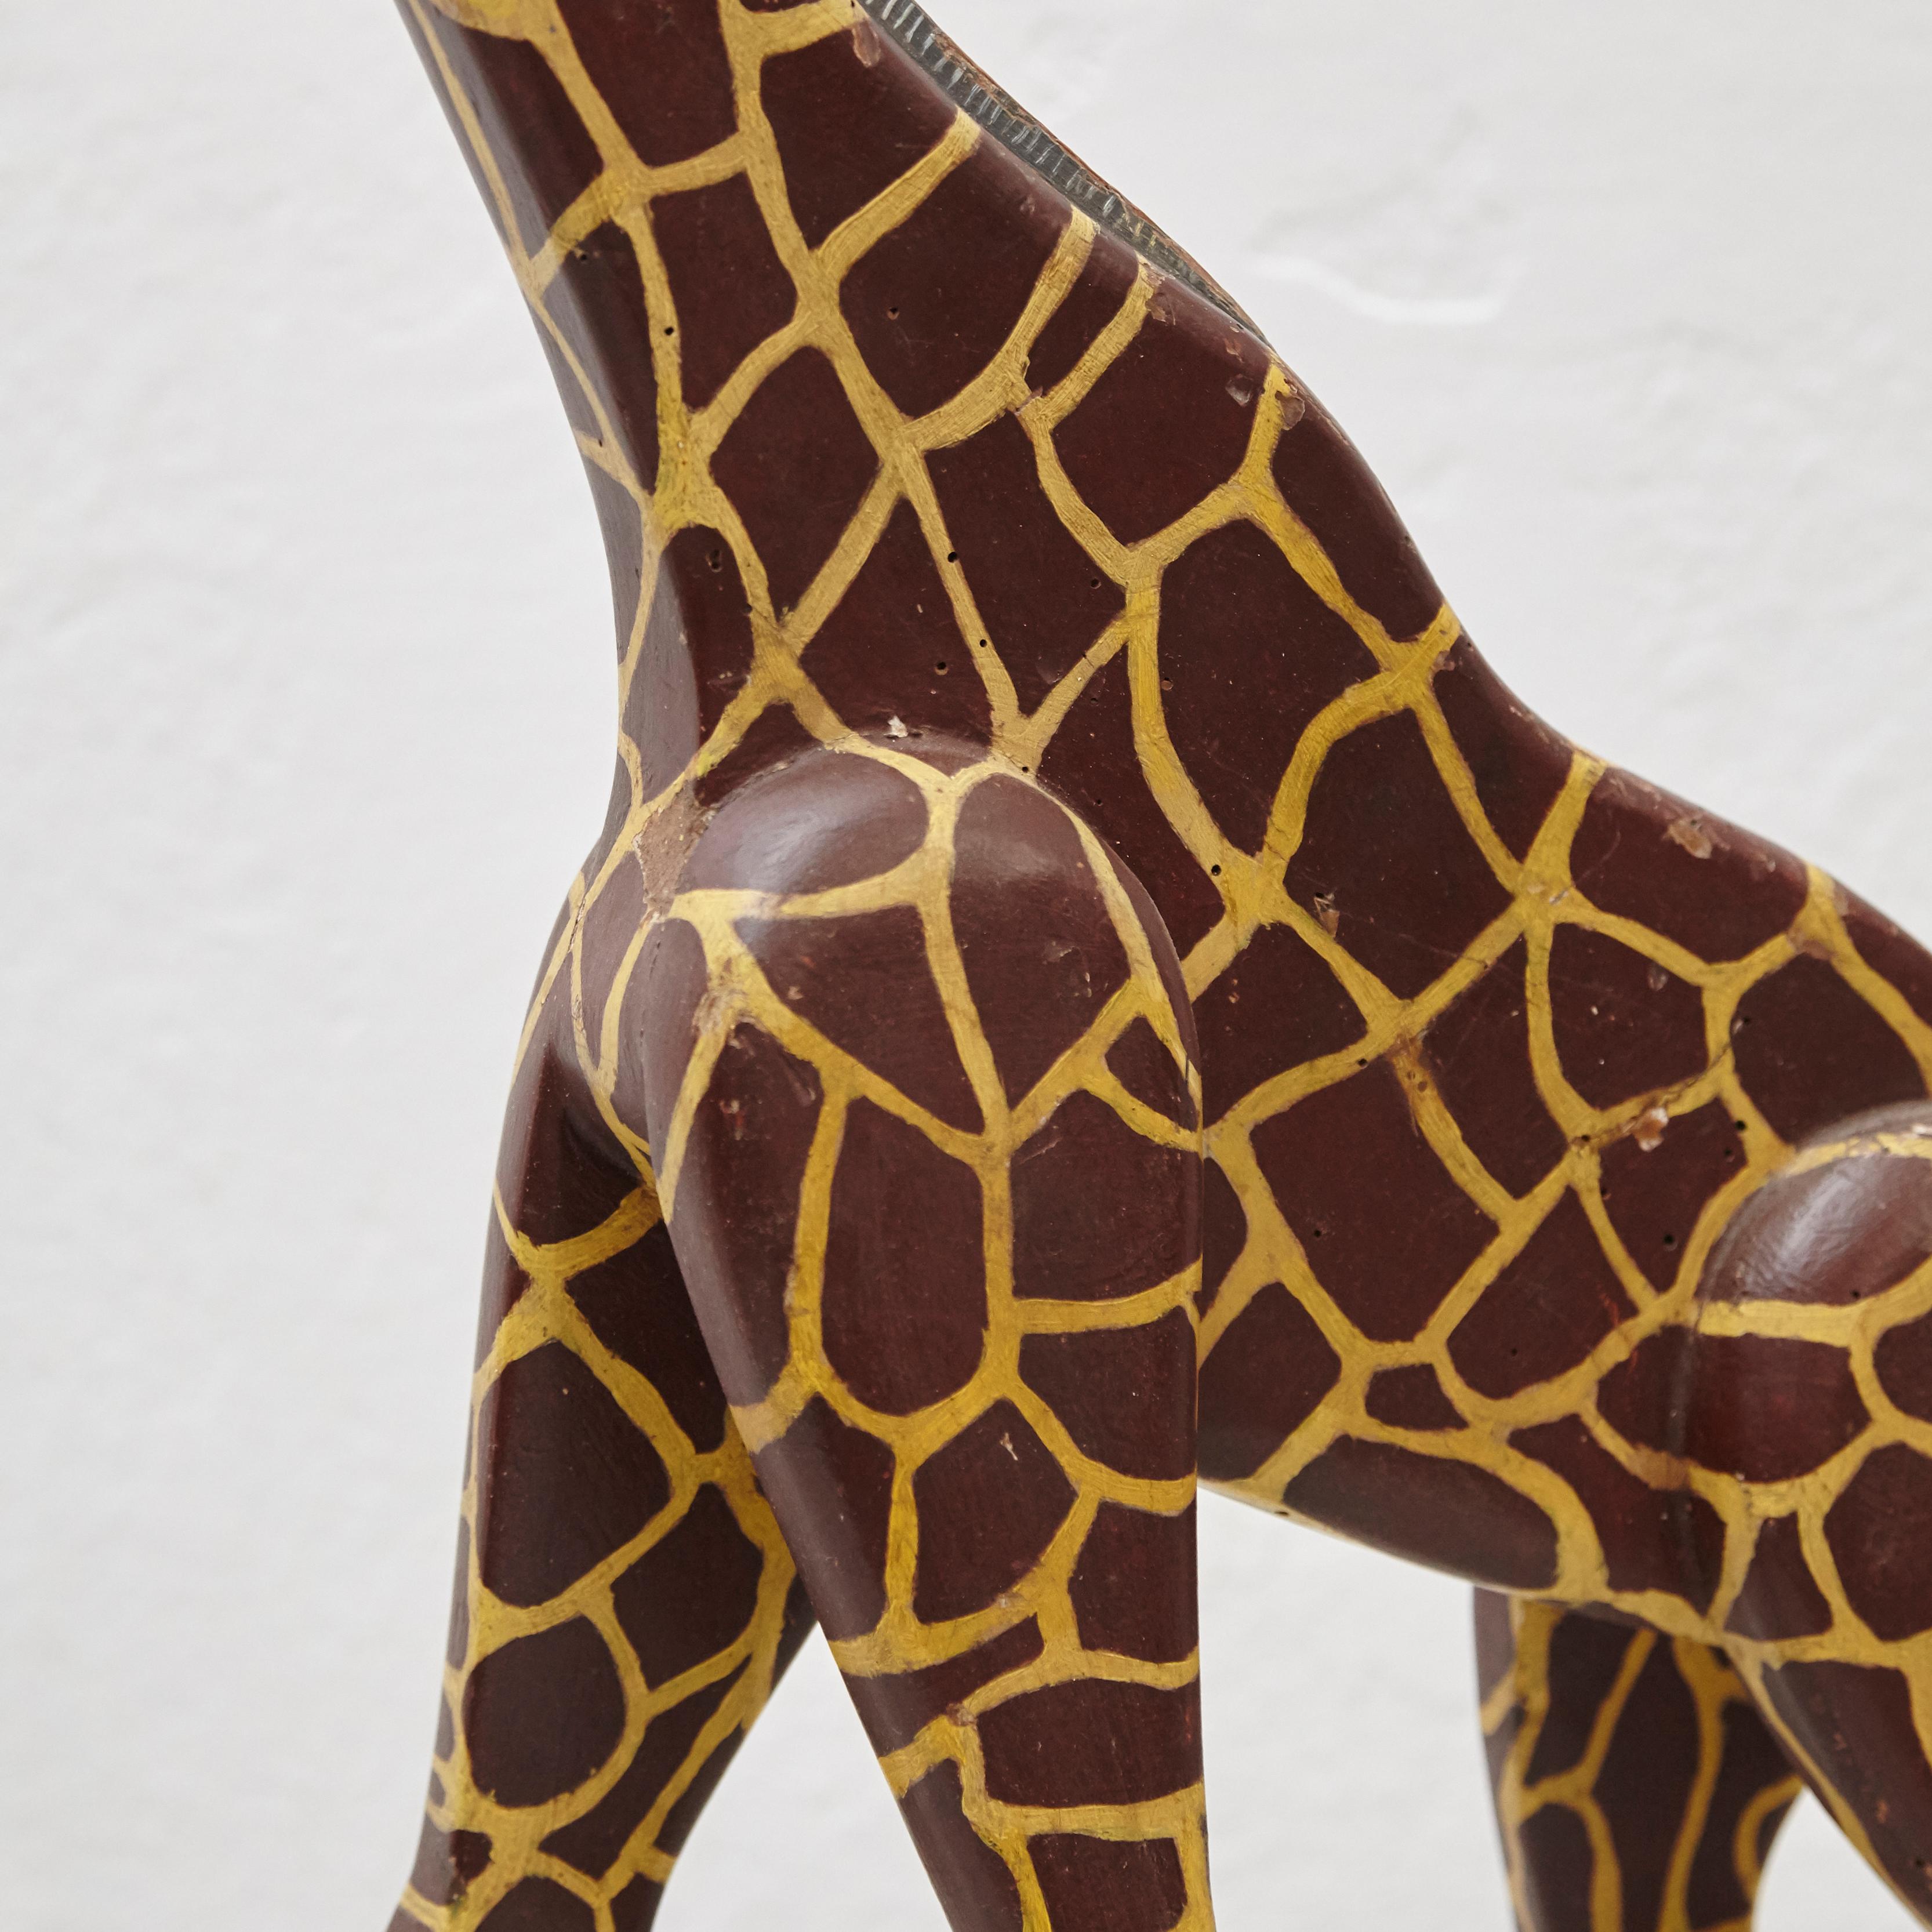 Antique wood giraffe sculpture.
By unknown artist, circa 1930. In original condition, with minor wear consistent with age and use, preserving a beautiful patina.

Materials:
Wood

Dimensions:
D 43 cm x W 16 cm x H 57 cm.